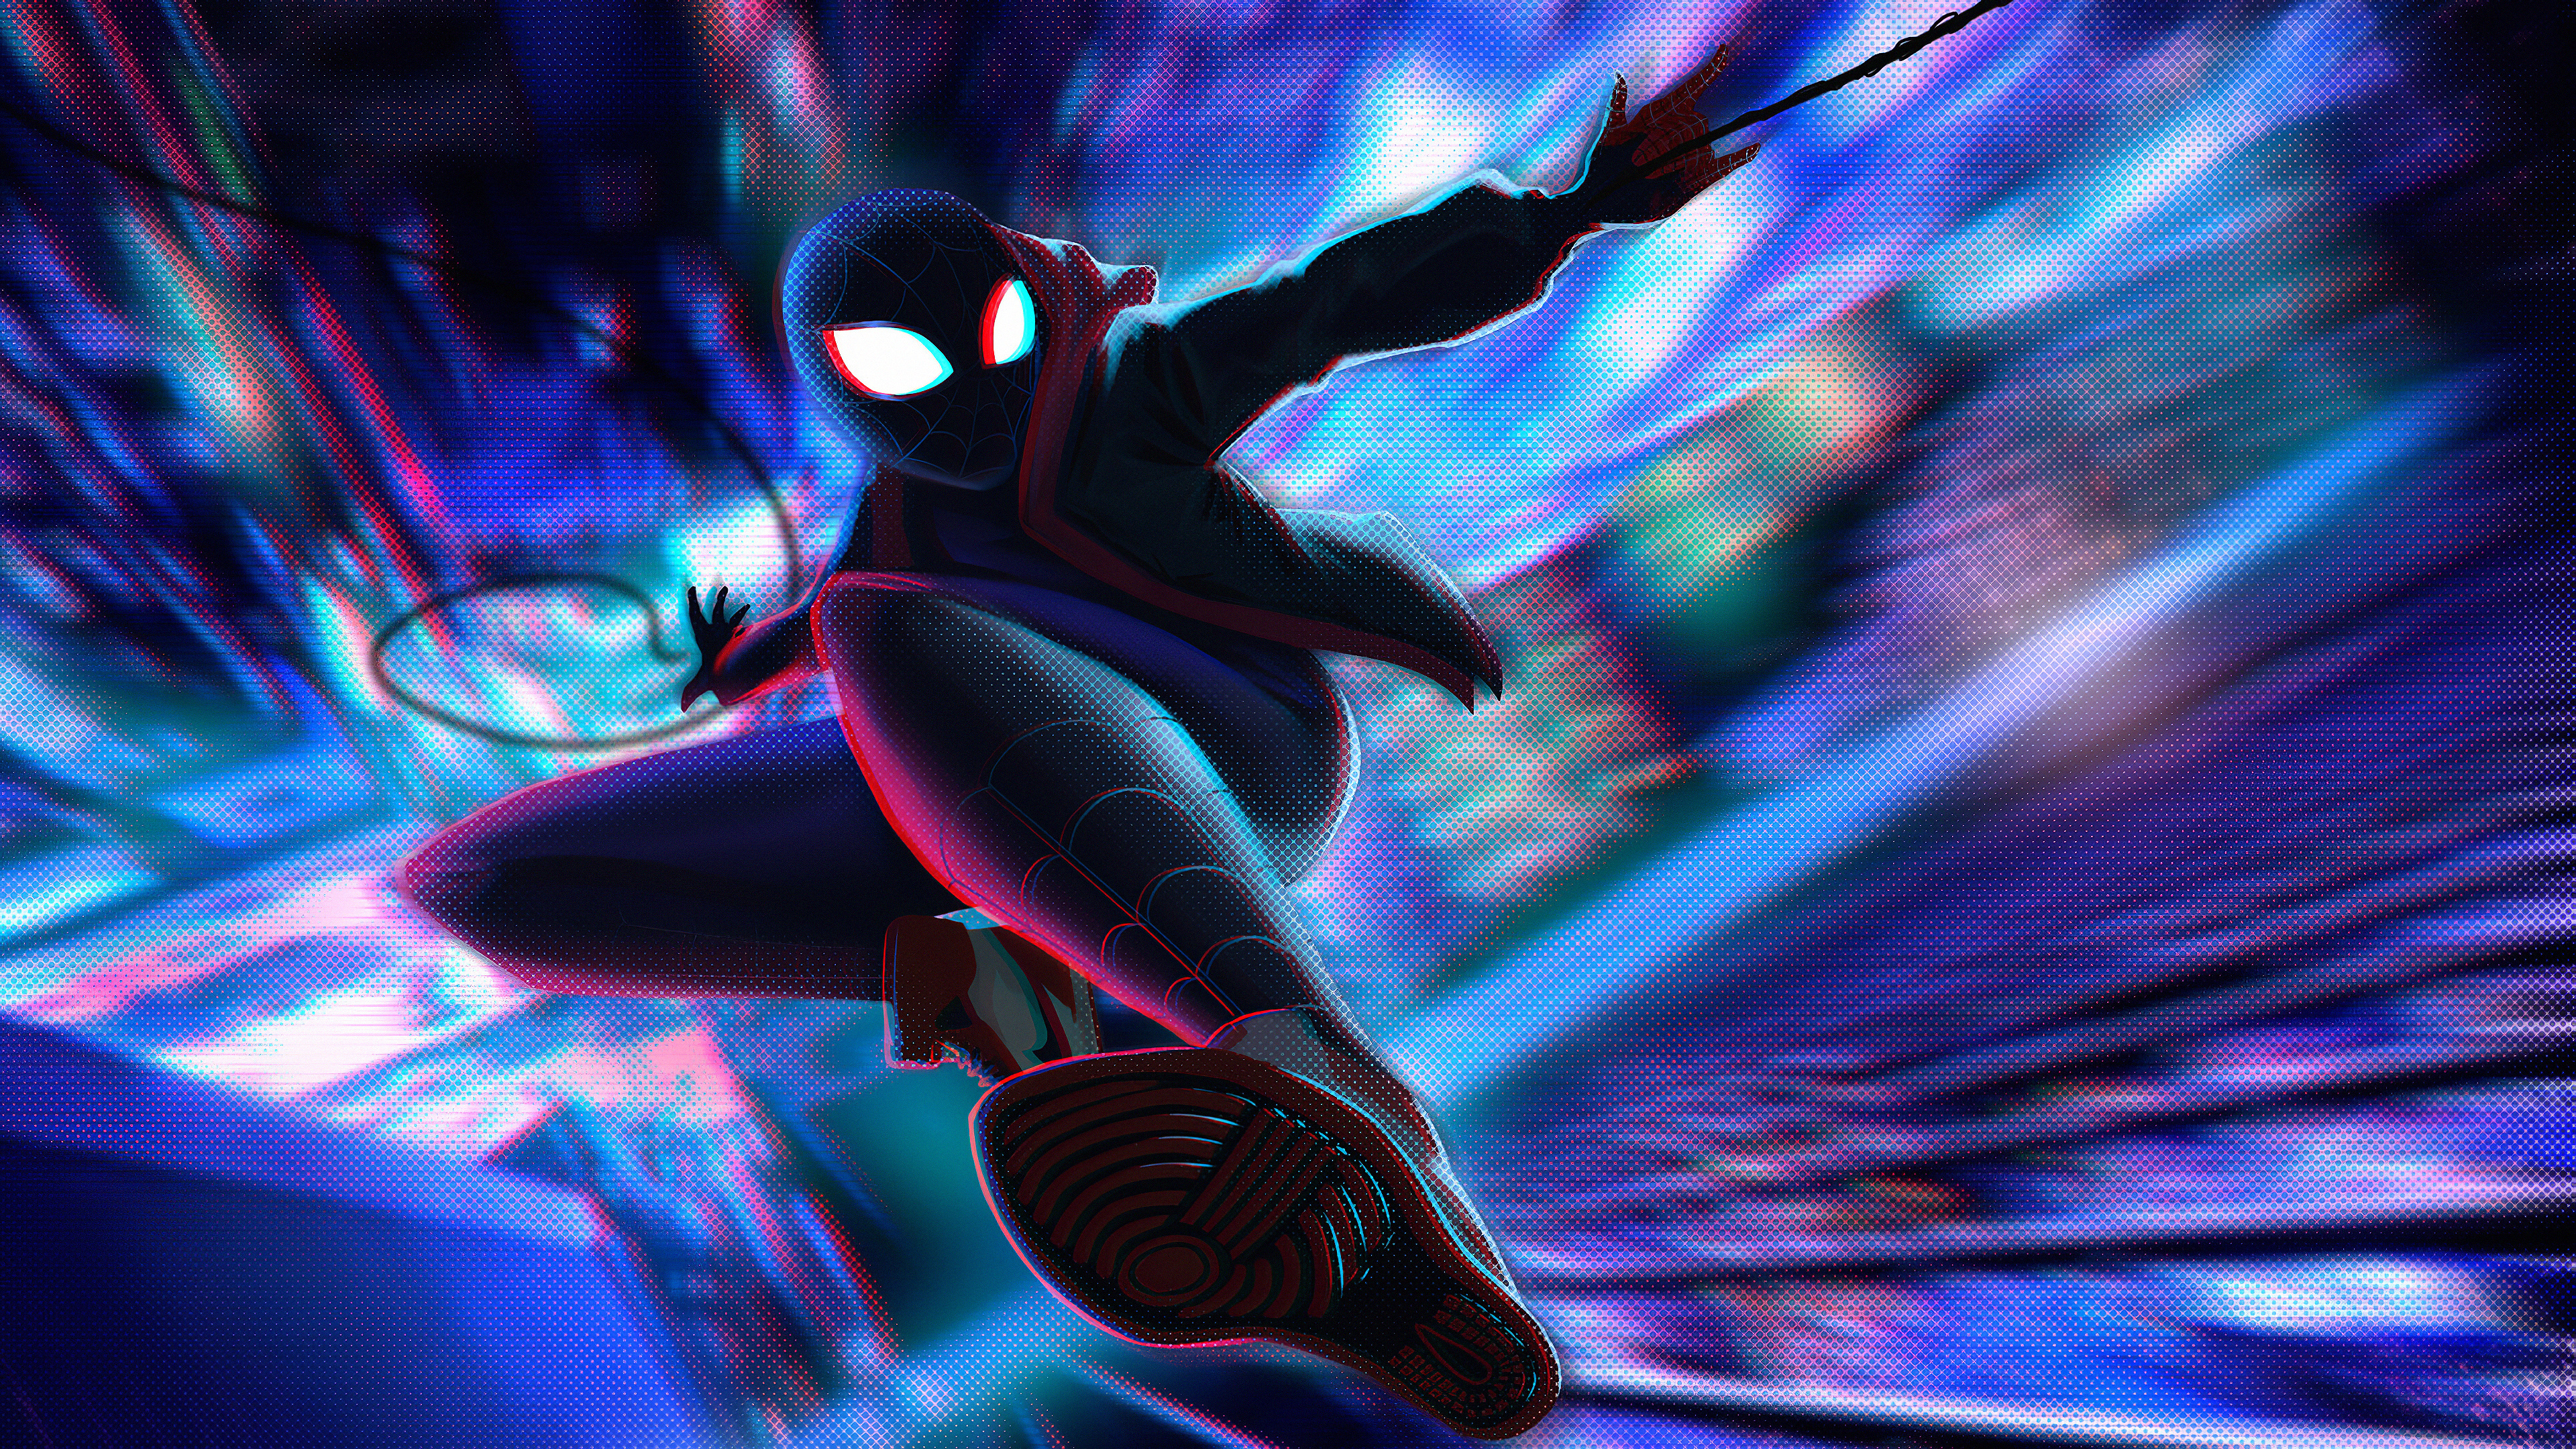 Miles Morales, Spider-man, Performance, Purple, Performing Arts. Wallpaper in 3840x2160 Resolution